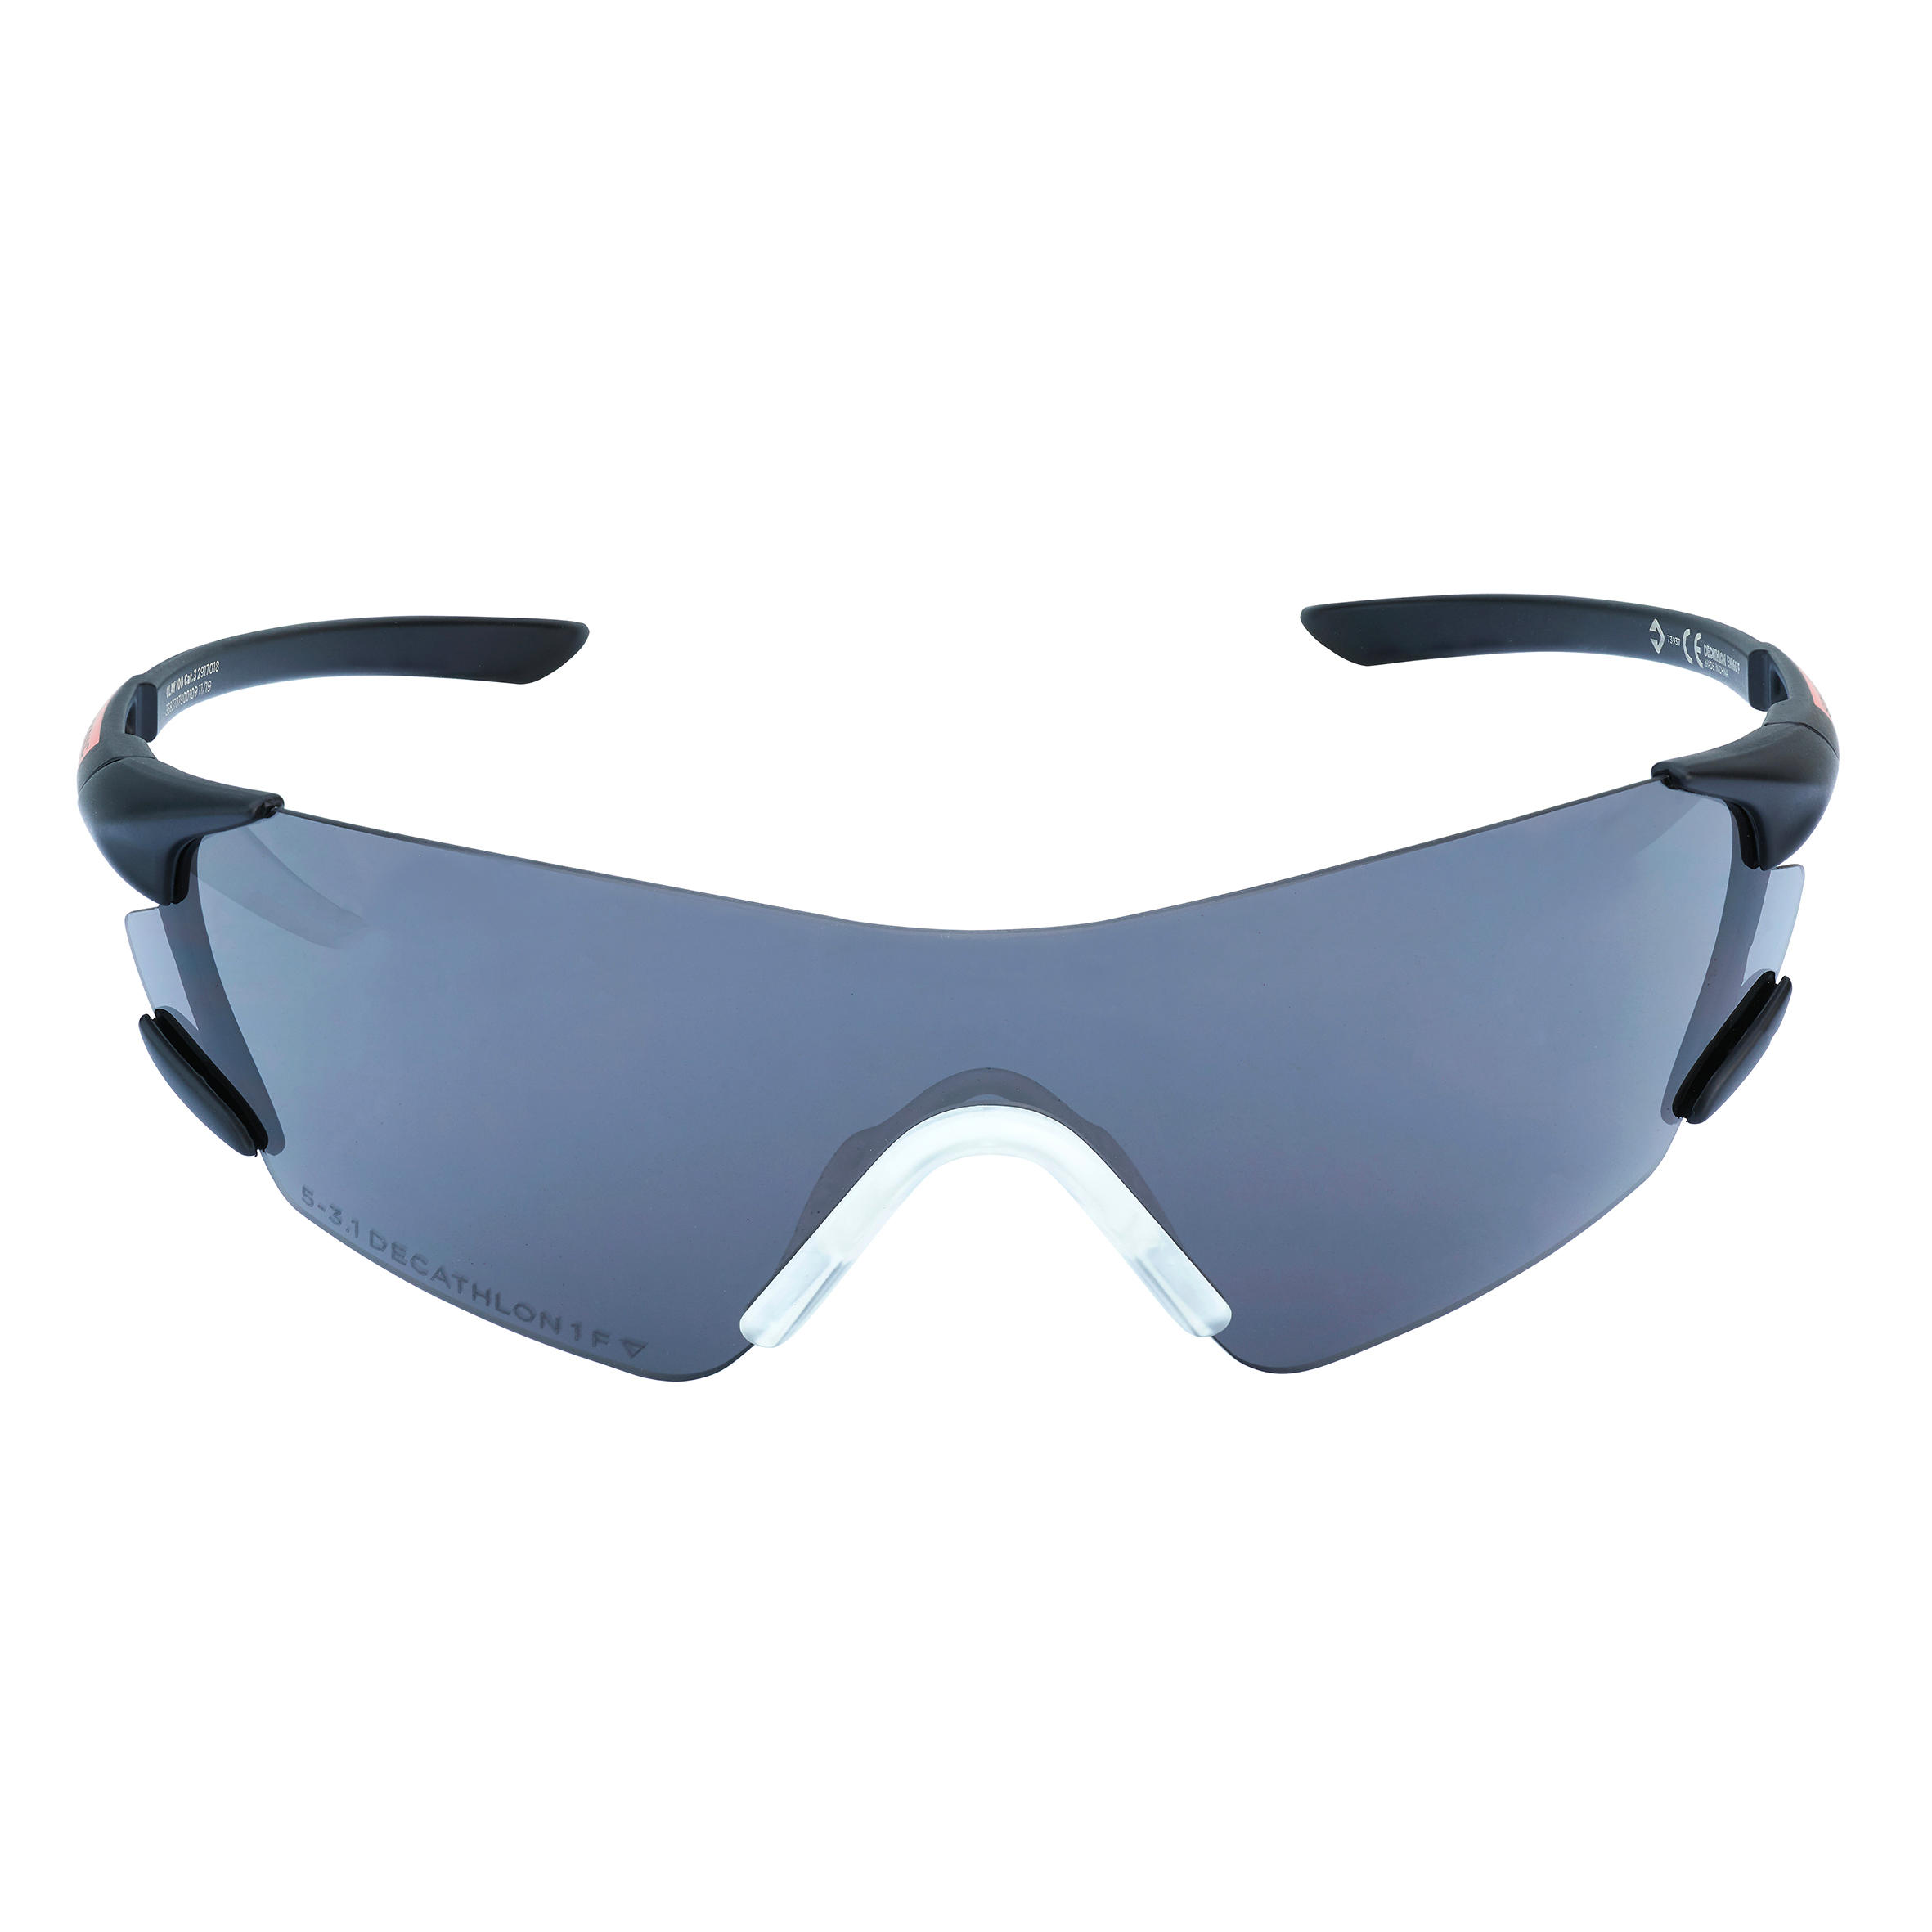 CLAY PIGEON SHOOTING PROTECTIVE GLASSES 100, STRONG SUNGLASS LENSES, CATEGORY 3 2/5